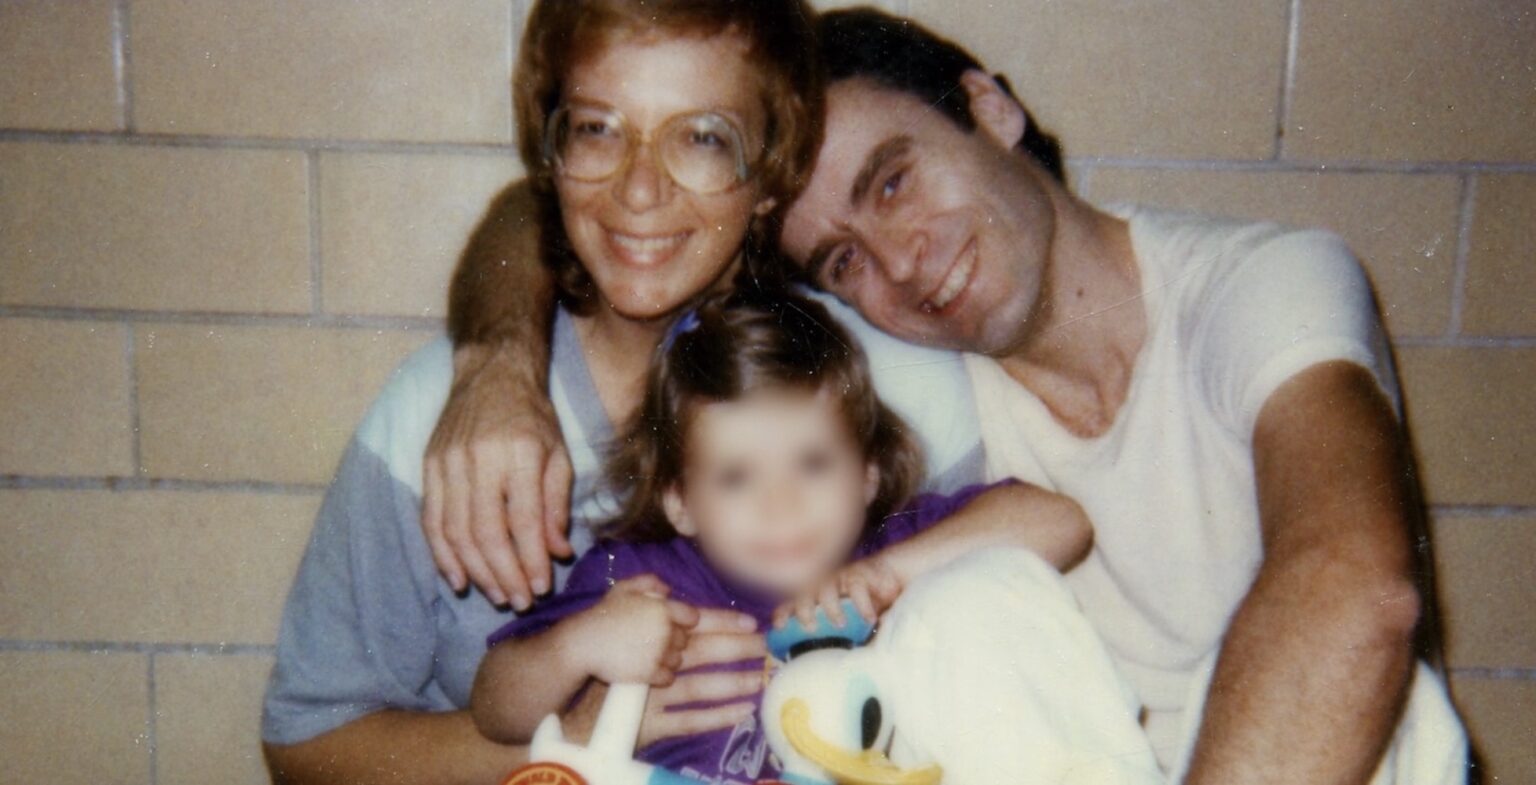 Once her husband, Ted Bundy, was arrested what became of Carole Ann Boone? For a long time she believed he was innocent of his crimes.